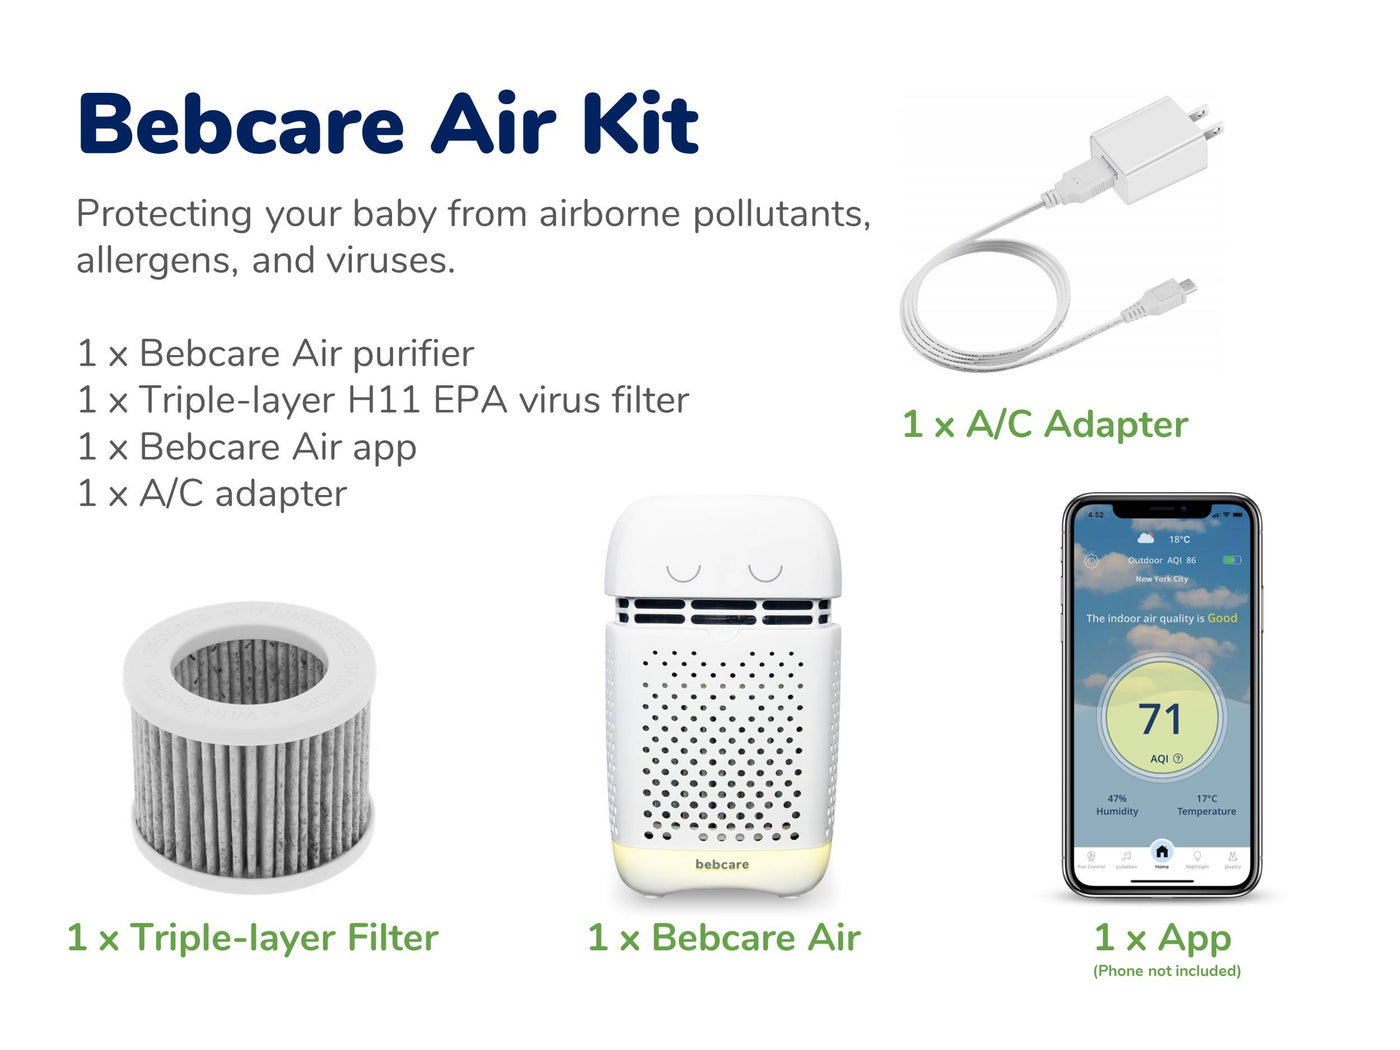 What's included in the package in the Bebcare Air